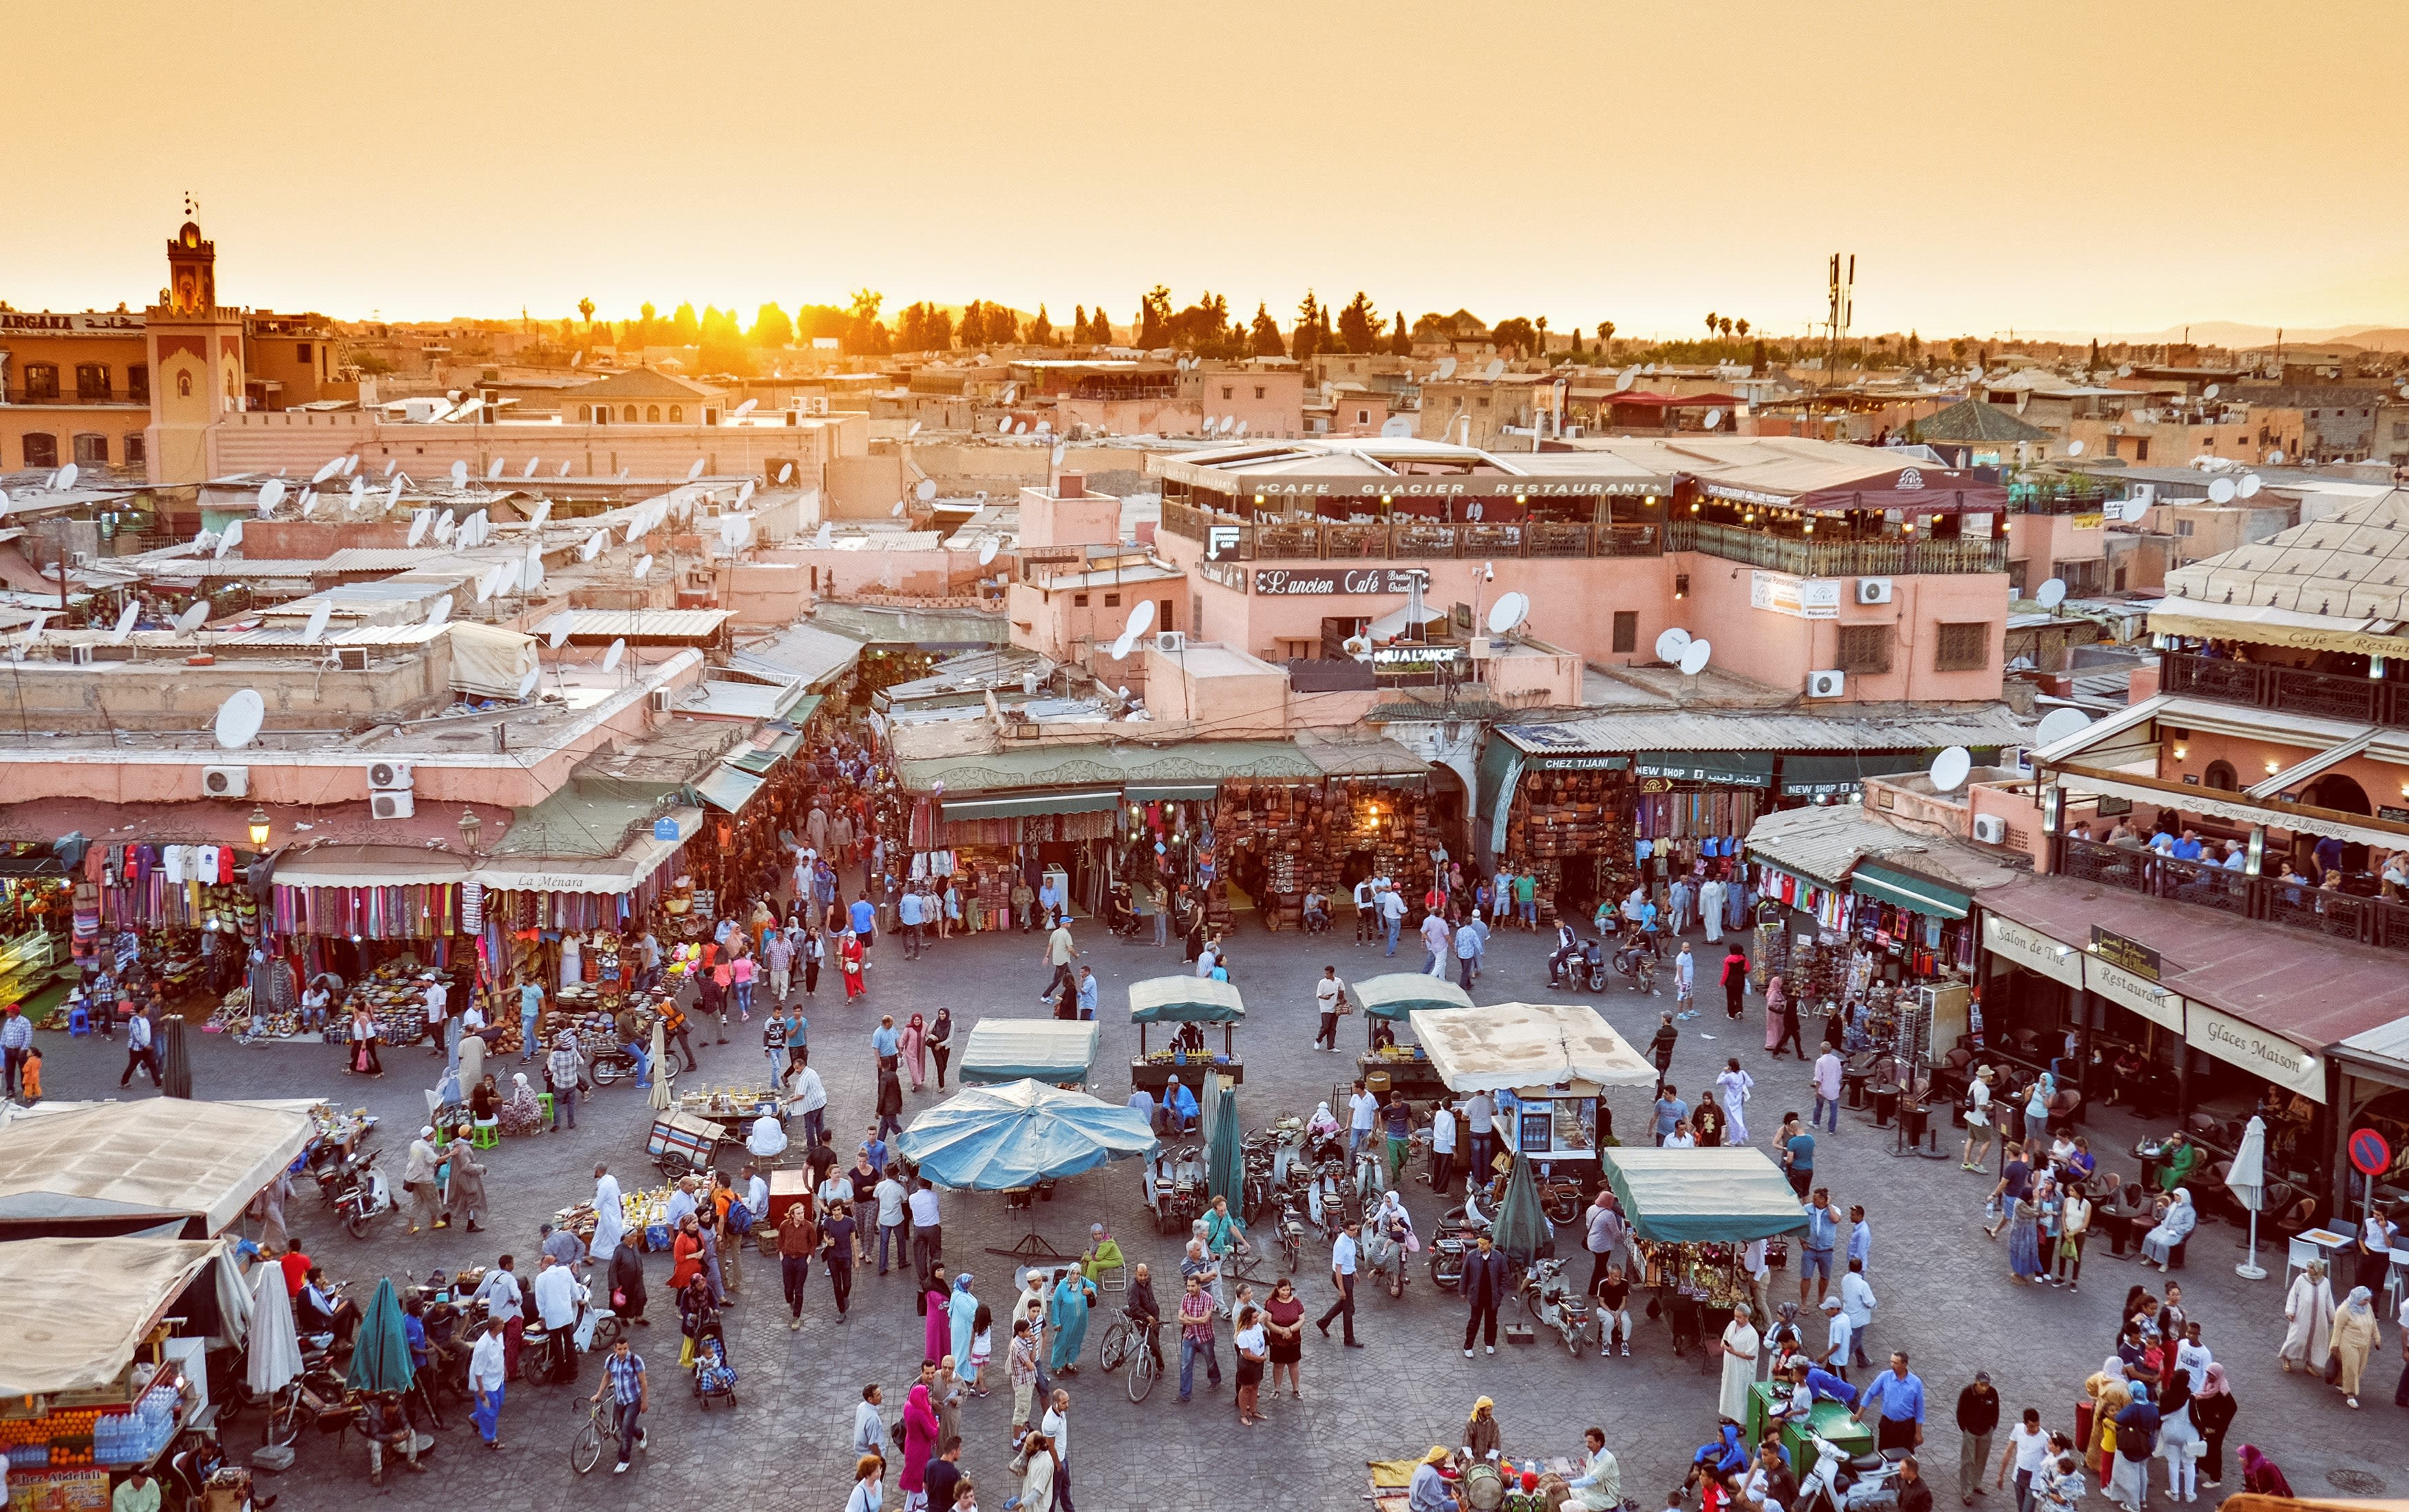 Aerial photograph of people in a busy outdoor market in Marrakesh